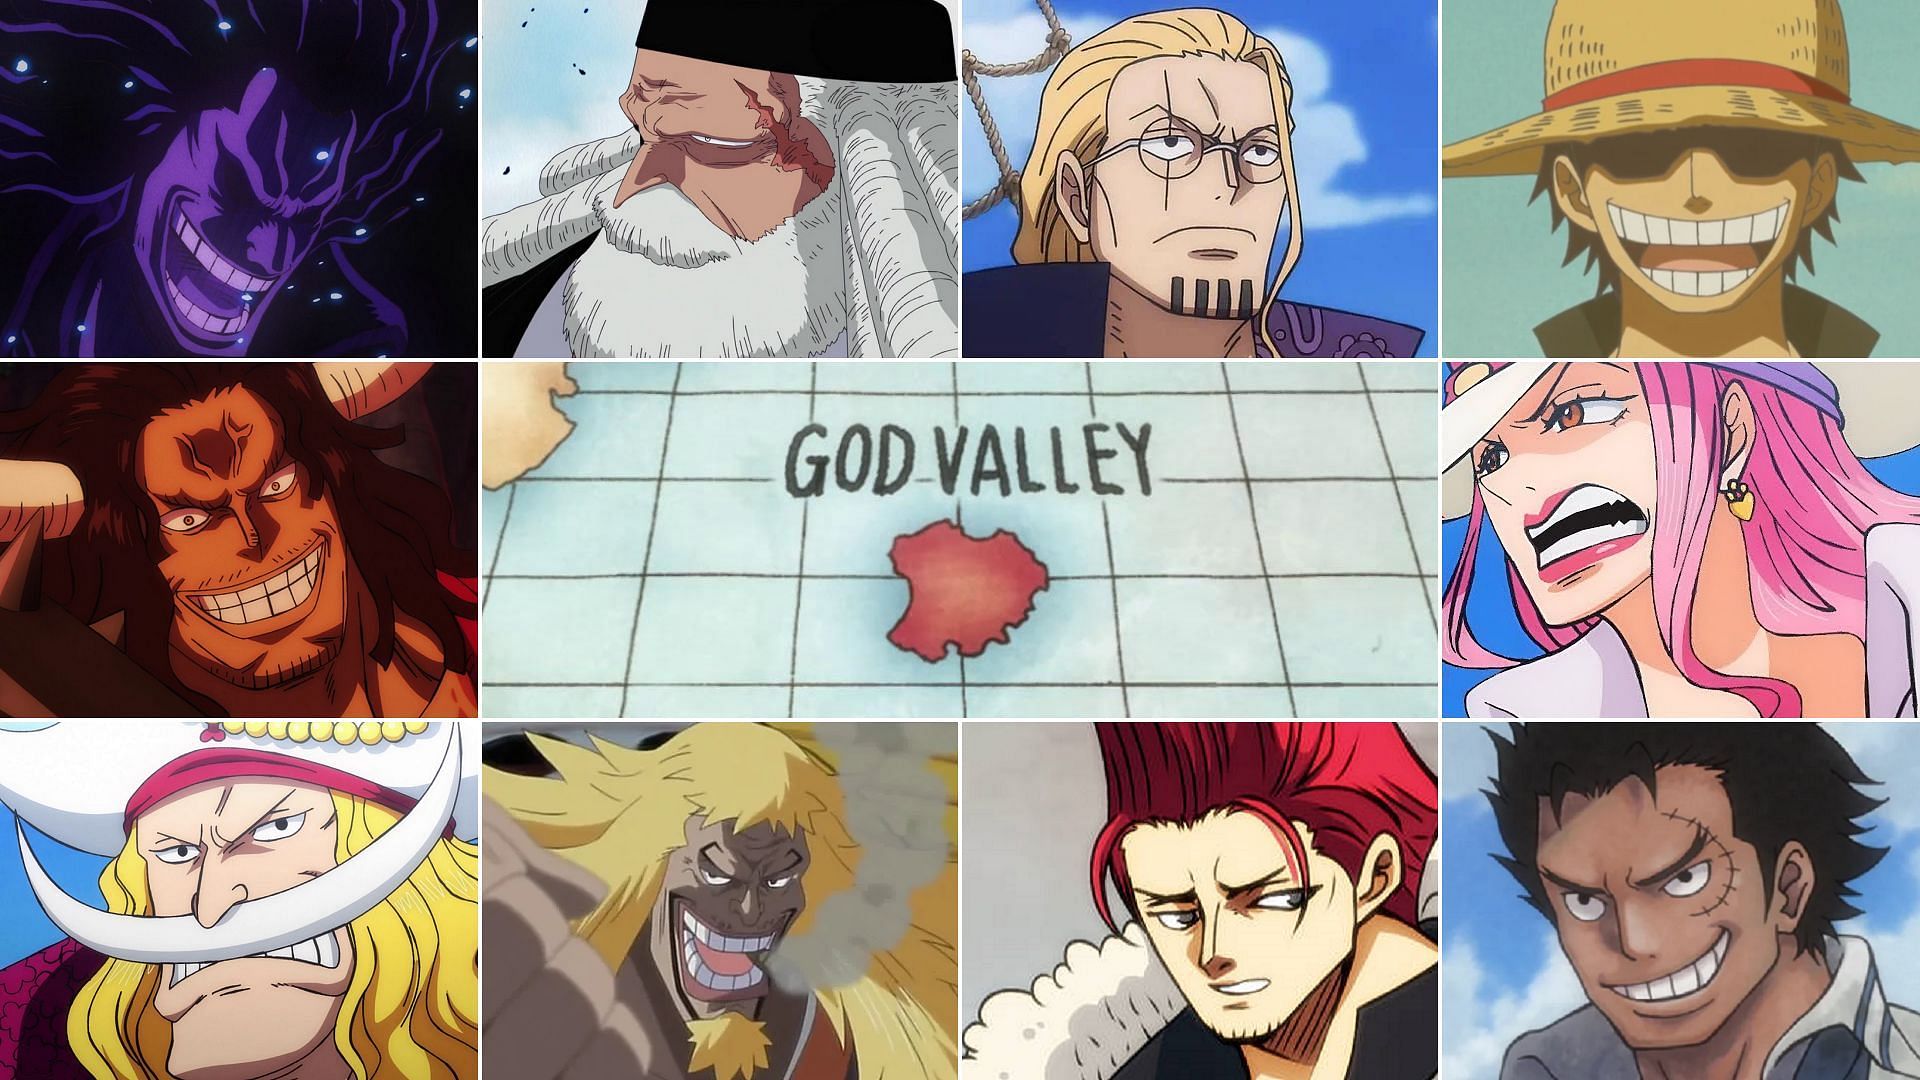 What Were Rocks And Roger Doing On God Valley In One Piece #1096?